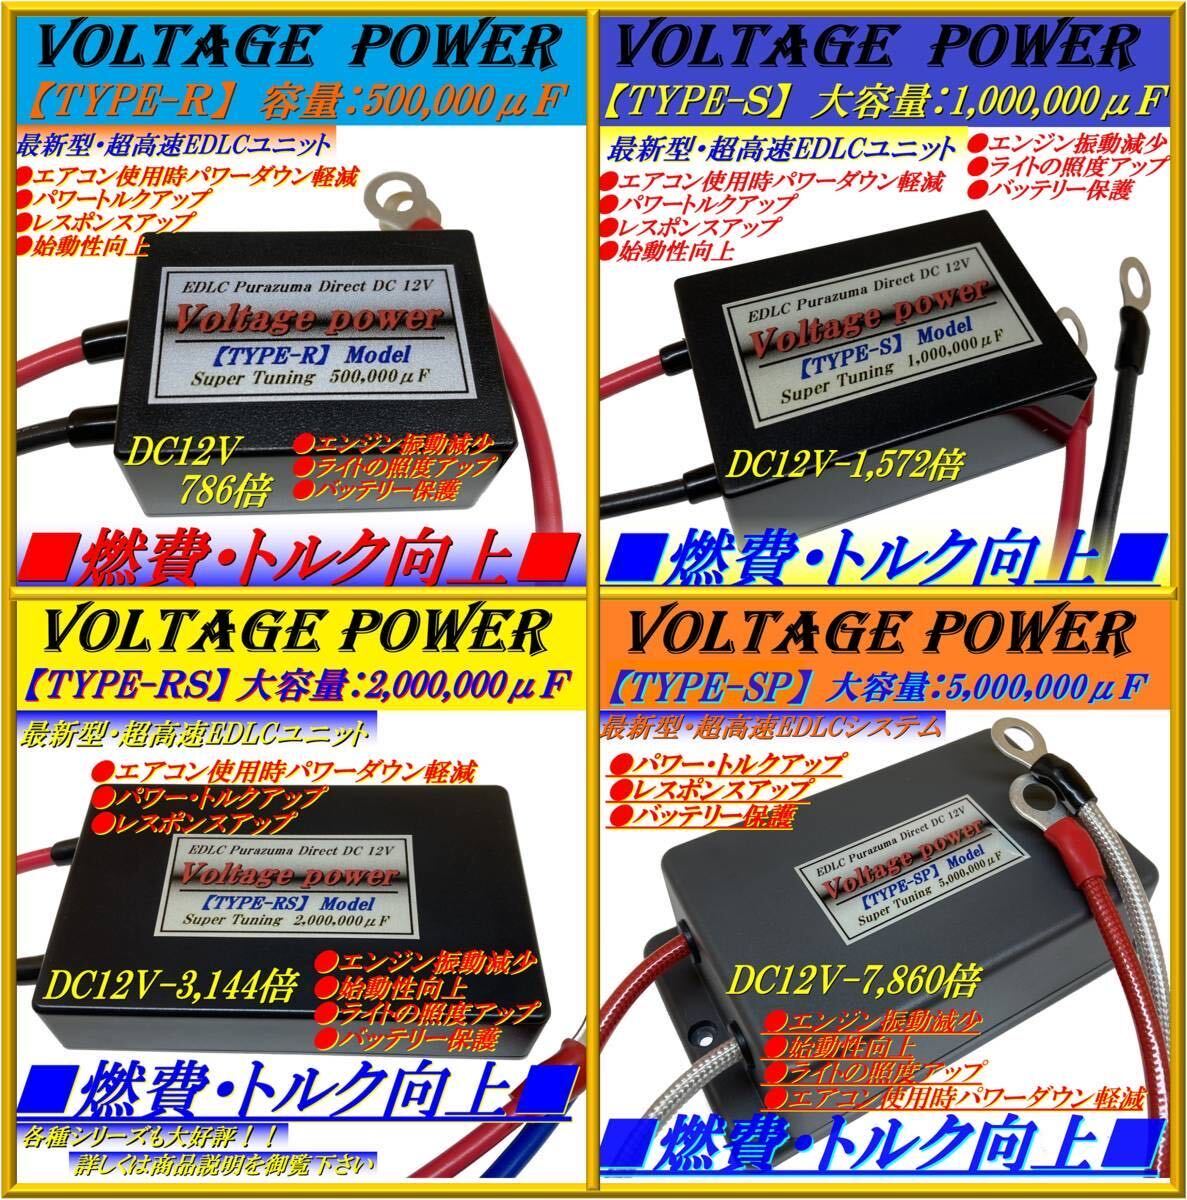  limited time *50%OFF* battery strengthening equipment rumor voltage power!3144 times type low price . electrolysis condenser is not newest EDLC mounted!****